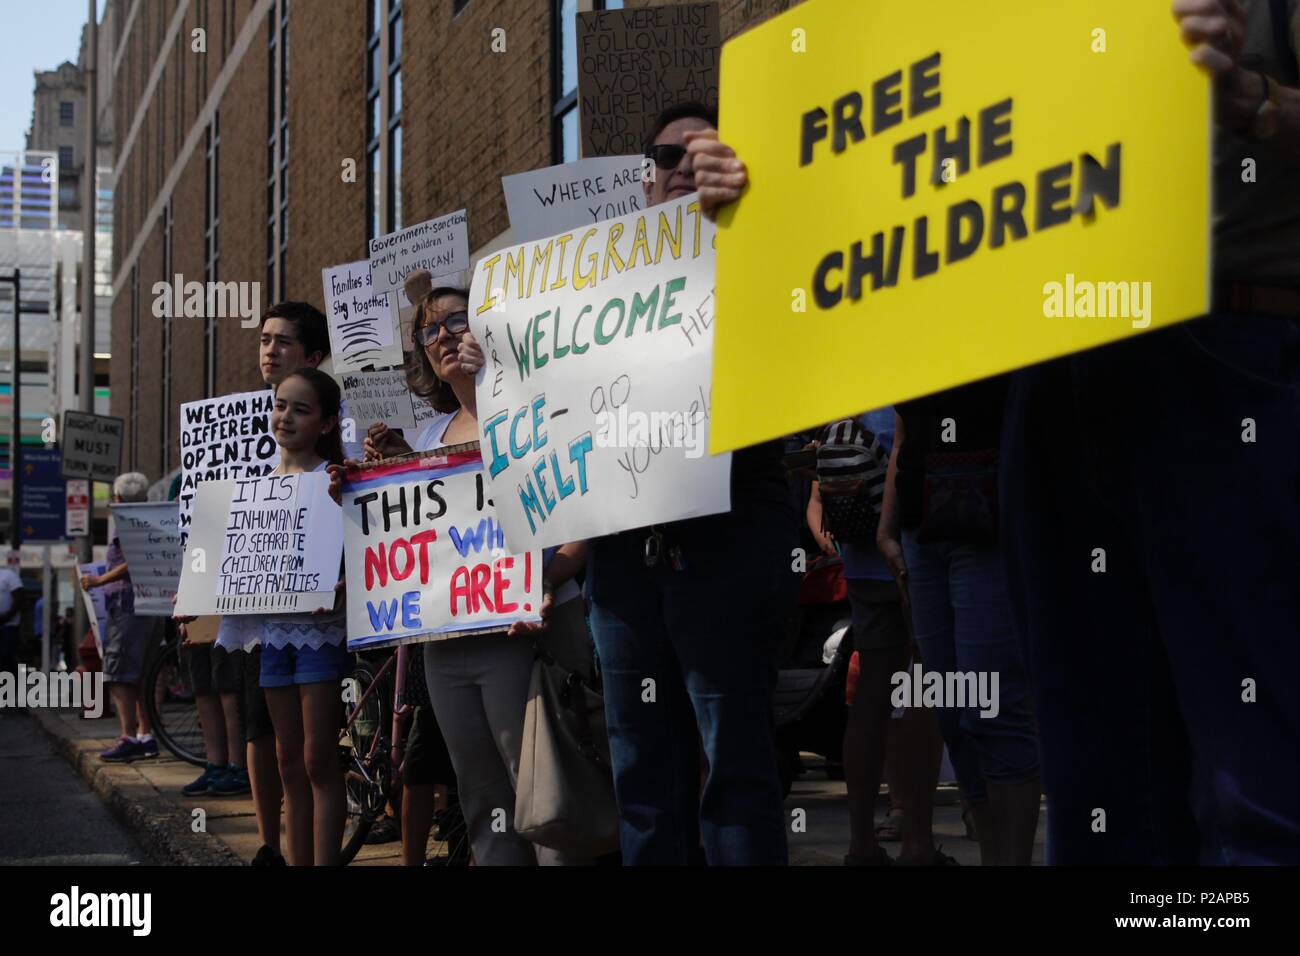 Philadelphia, PA, USA - June 14, 2018: Hundreds of demonstrators participate in a Families Belong Together rally outside the ICE office in Philadelphia. The rally was one of several held nationwide to protest the US Government policy of separating immigrant children and their parents at the U.S. - Mexico border. Credit: Jana Shea/ Alamy Live News Stock Photo